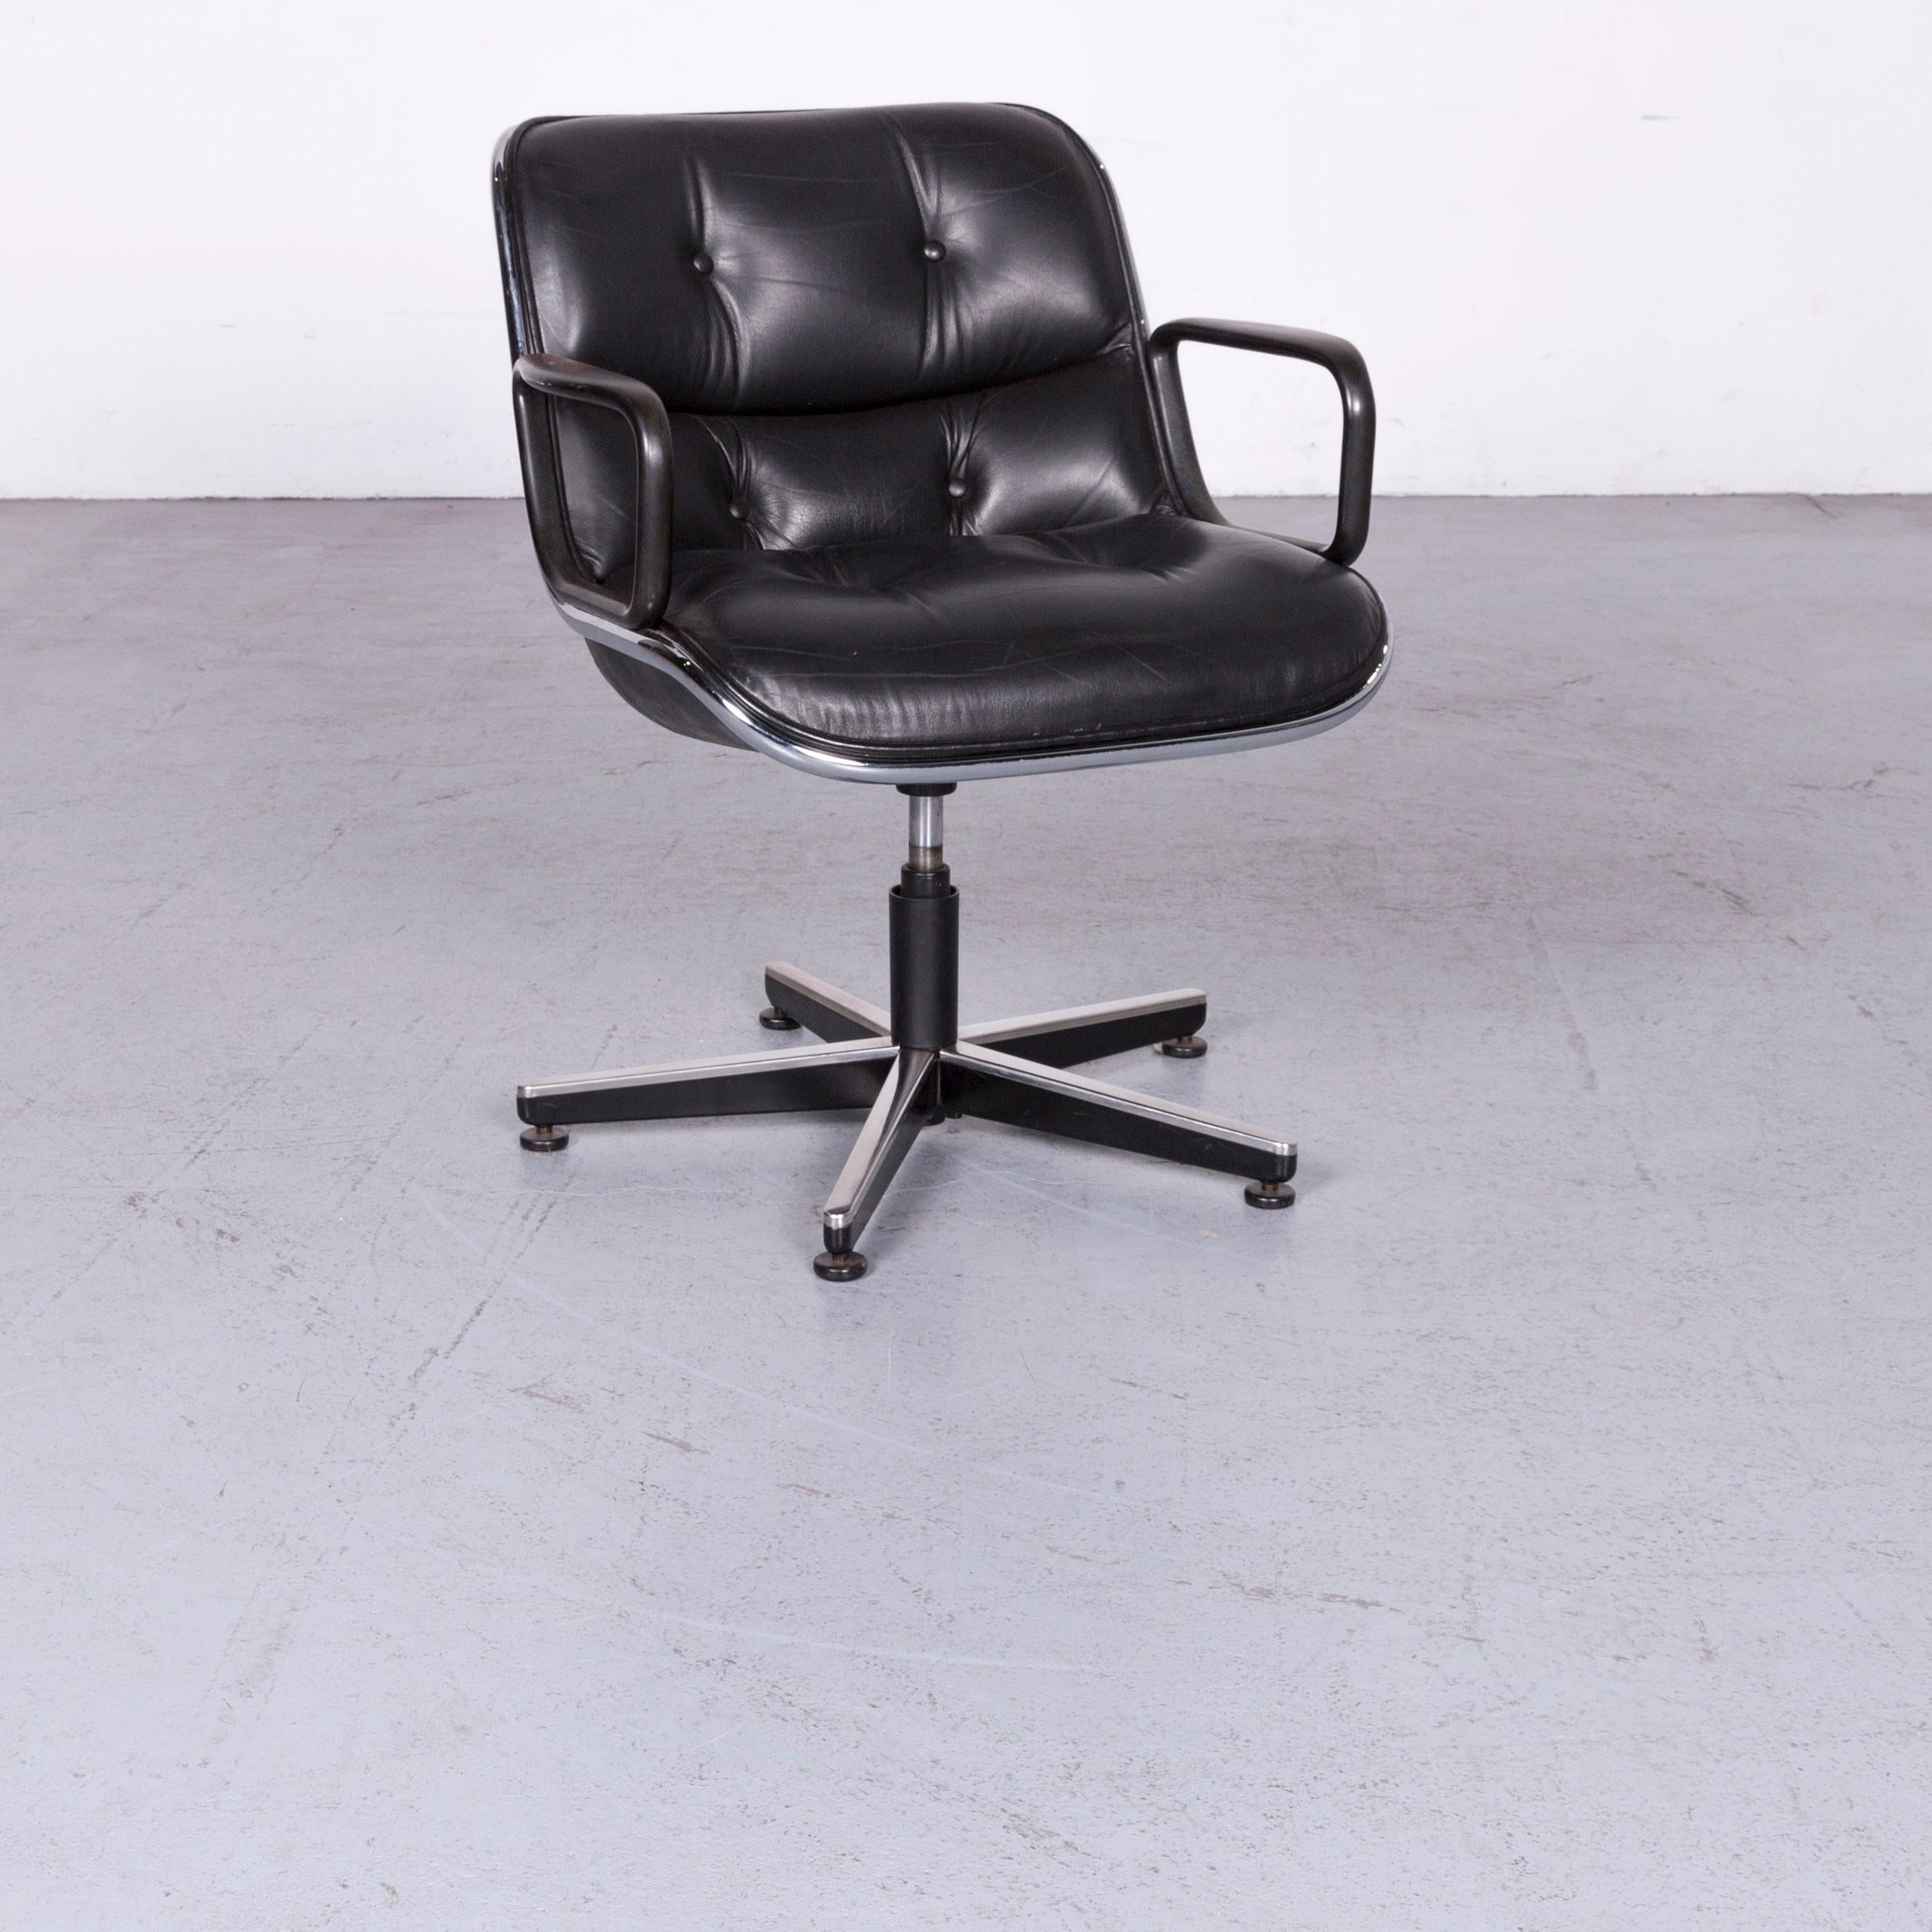 We bring to you a Knoll International Executive Chai leather armchair set black chair.